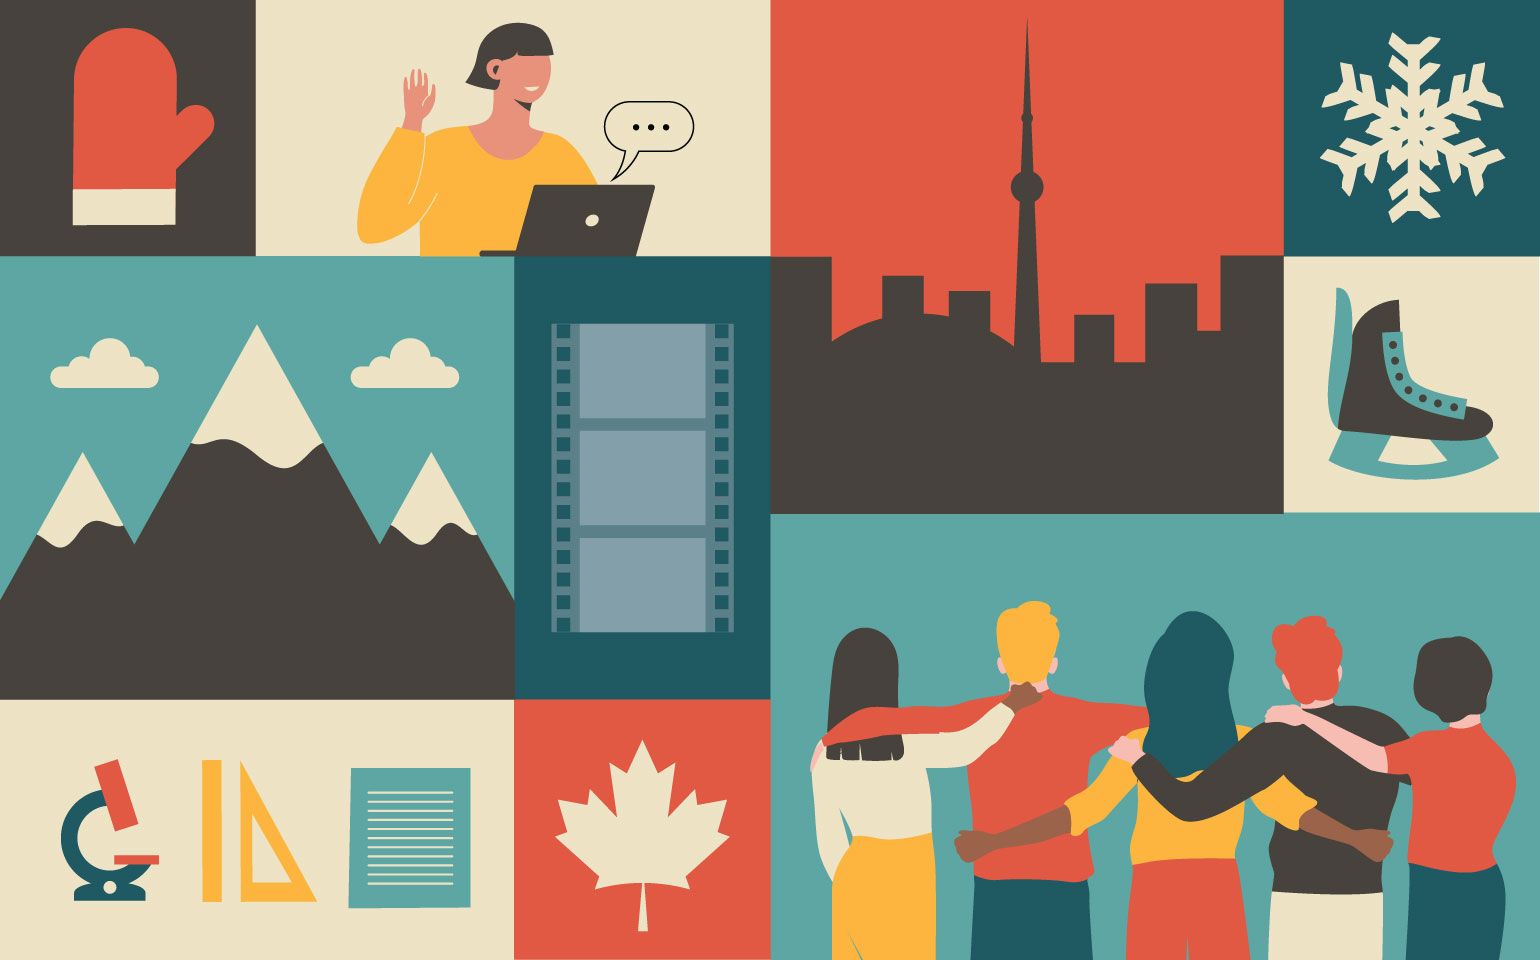 A collage of Canadiana photos are shown, with the CN Tower, a maple leaf and mountains displayed alongside a group of people with their arms around each other.